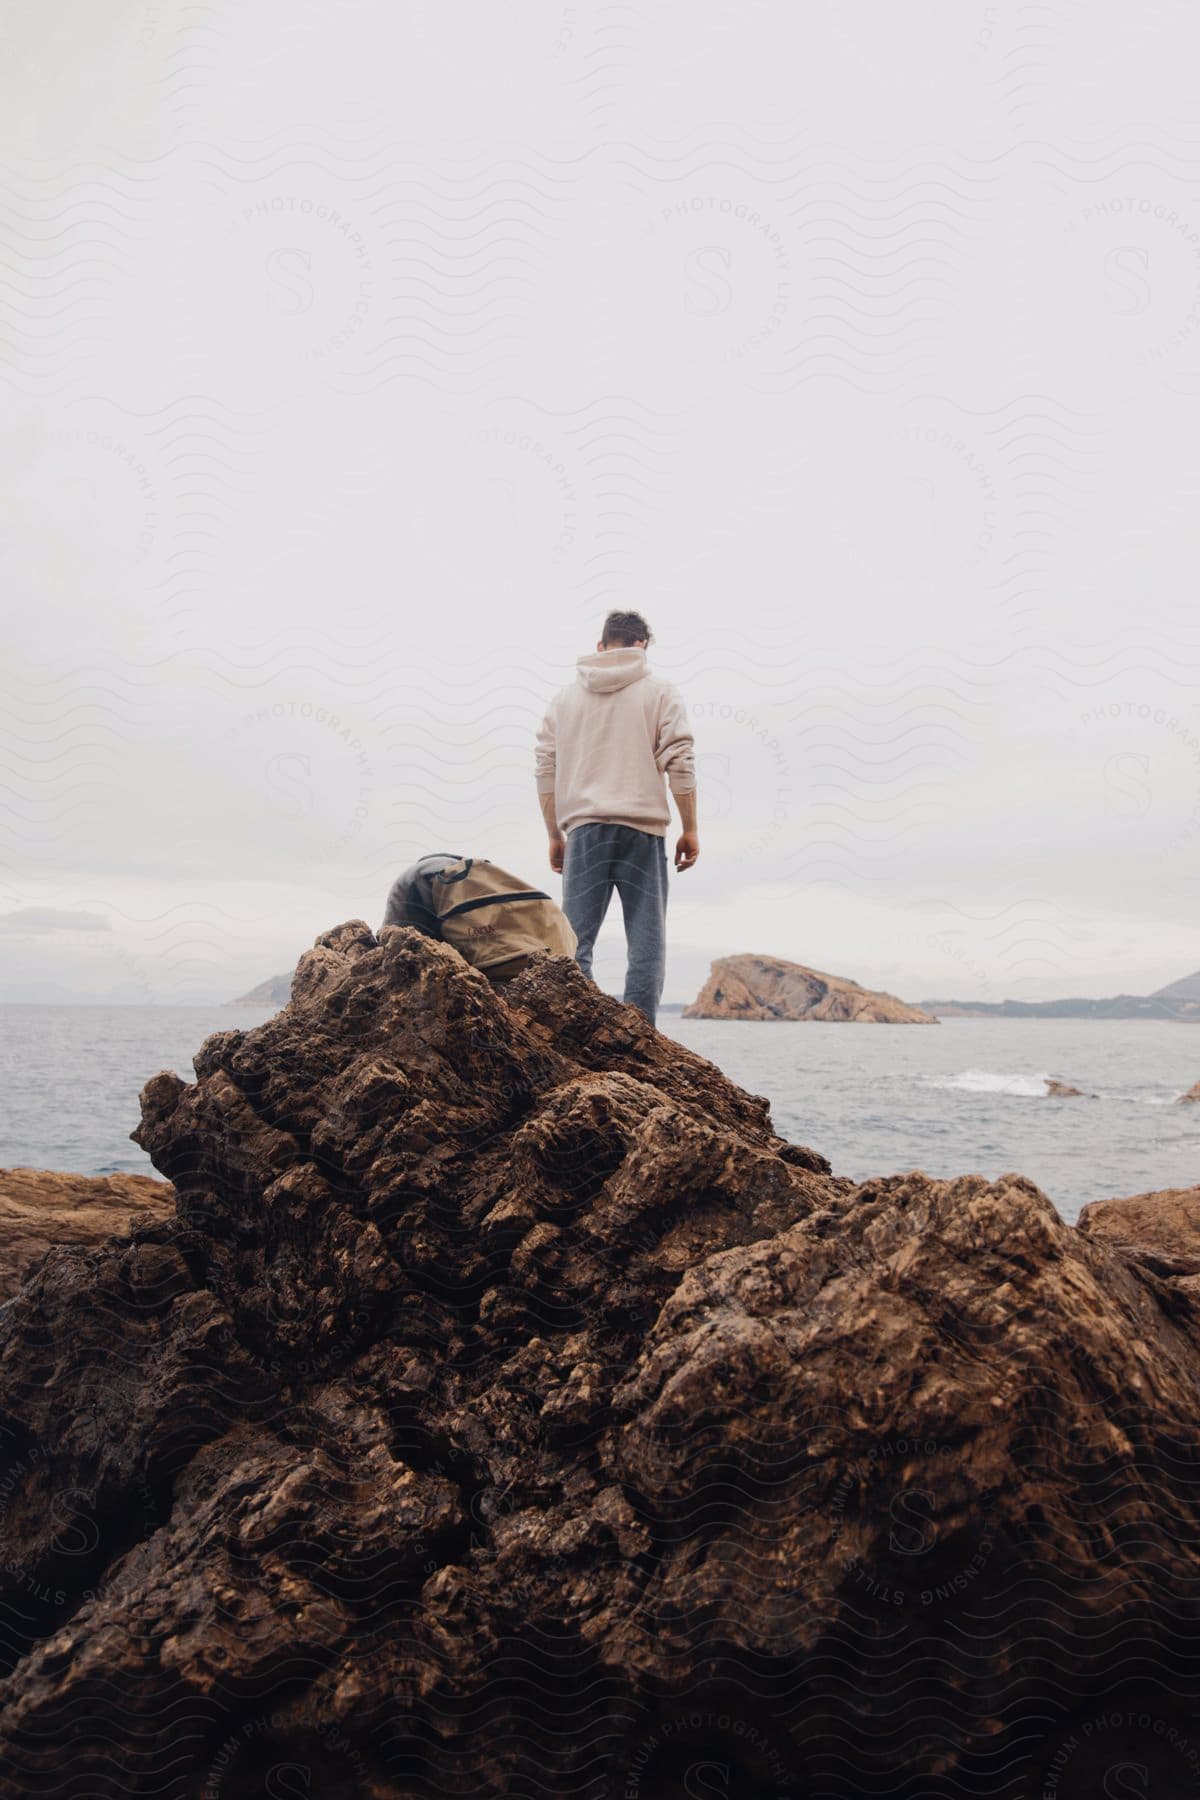 a man wearing a hoody standing on a rock by the sea looking at the waters